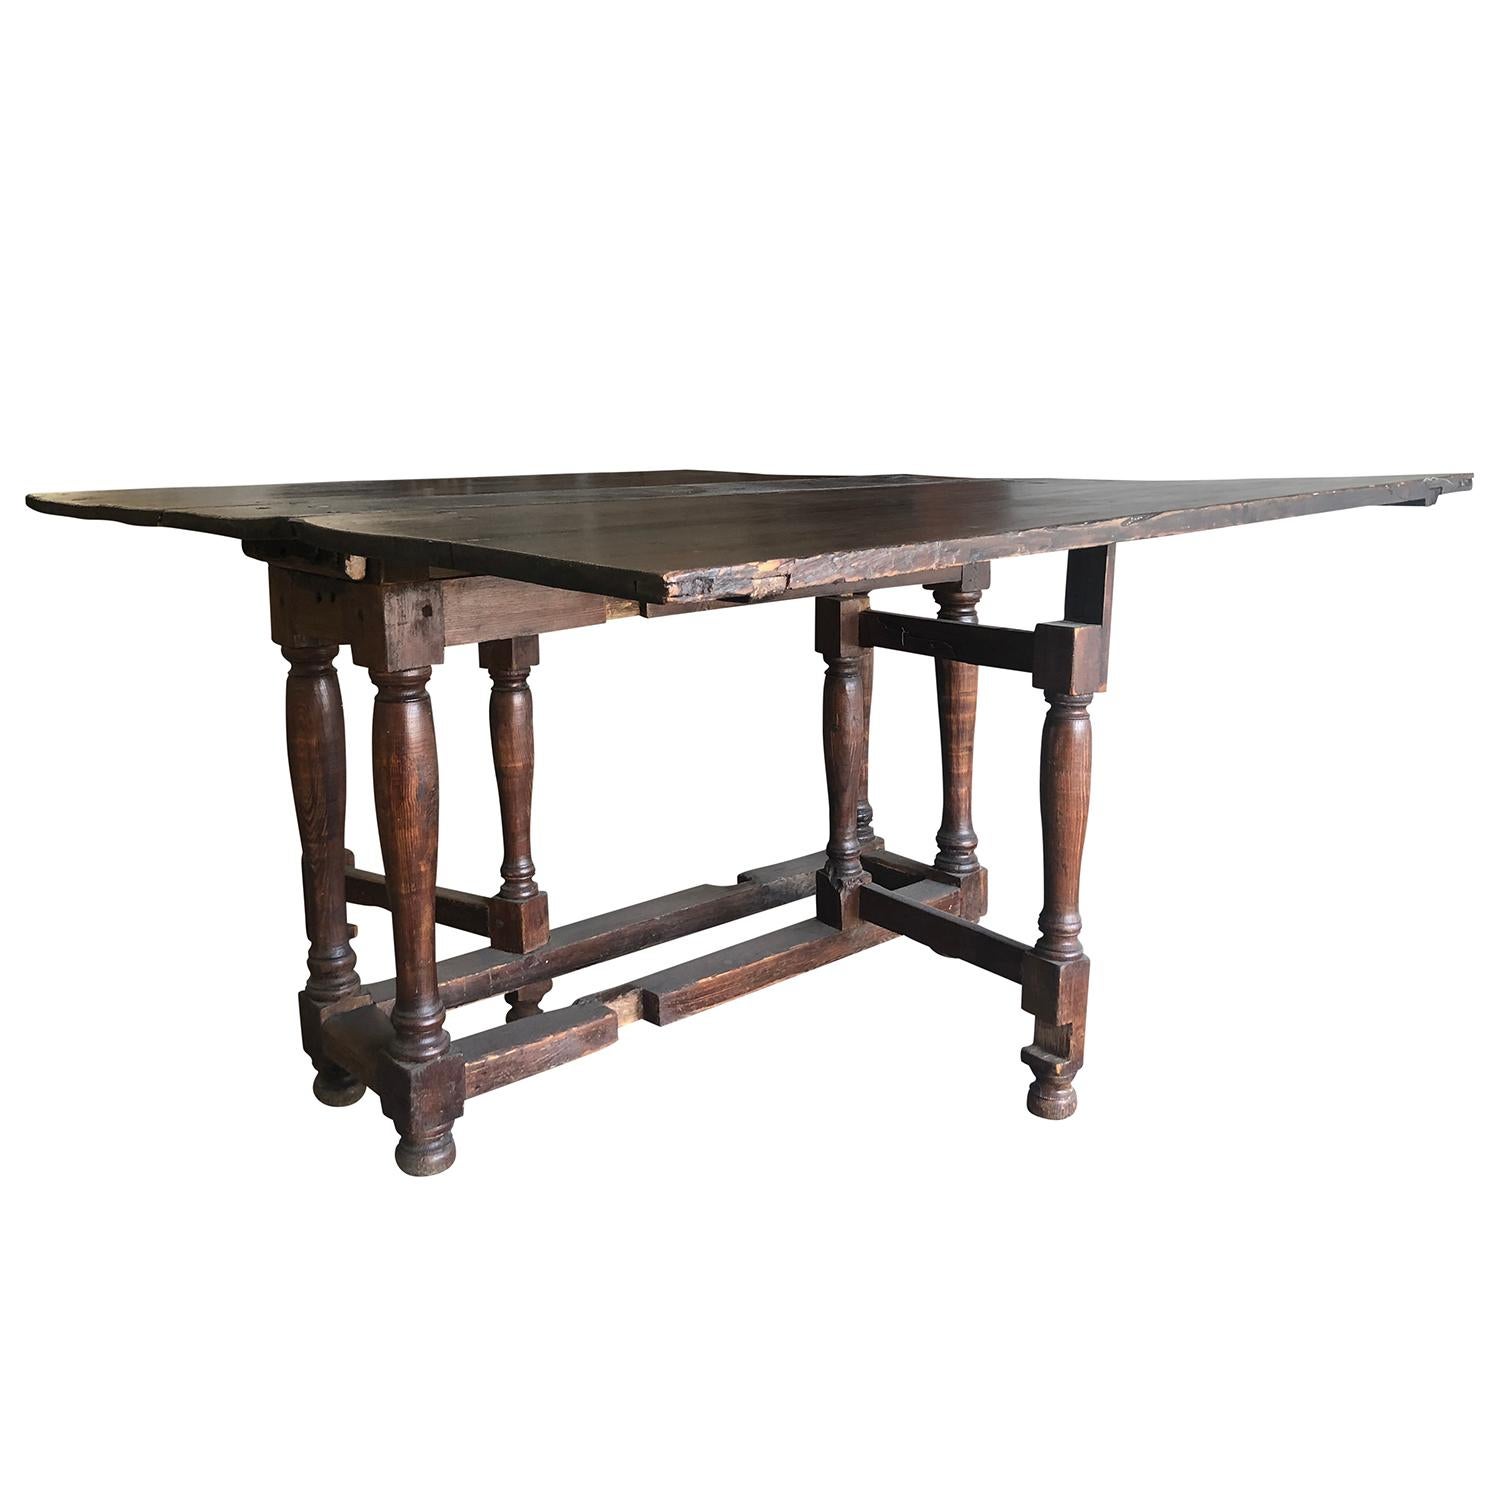 An antique French drop-leaf table from a farmhouse in Normandy, France. Made of hand crafted Walnut with a rustic finish, in good condition. Minor fading, scratches due to age. Wear consistent with age and use. Circa 18th Century, France.